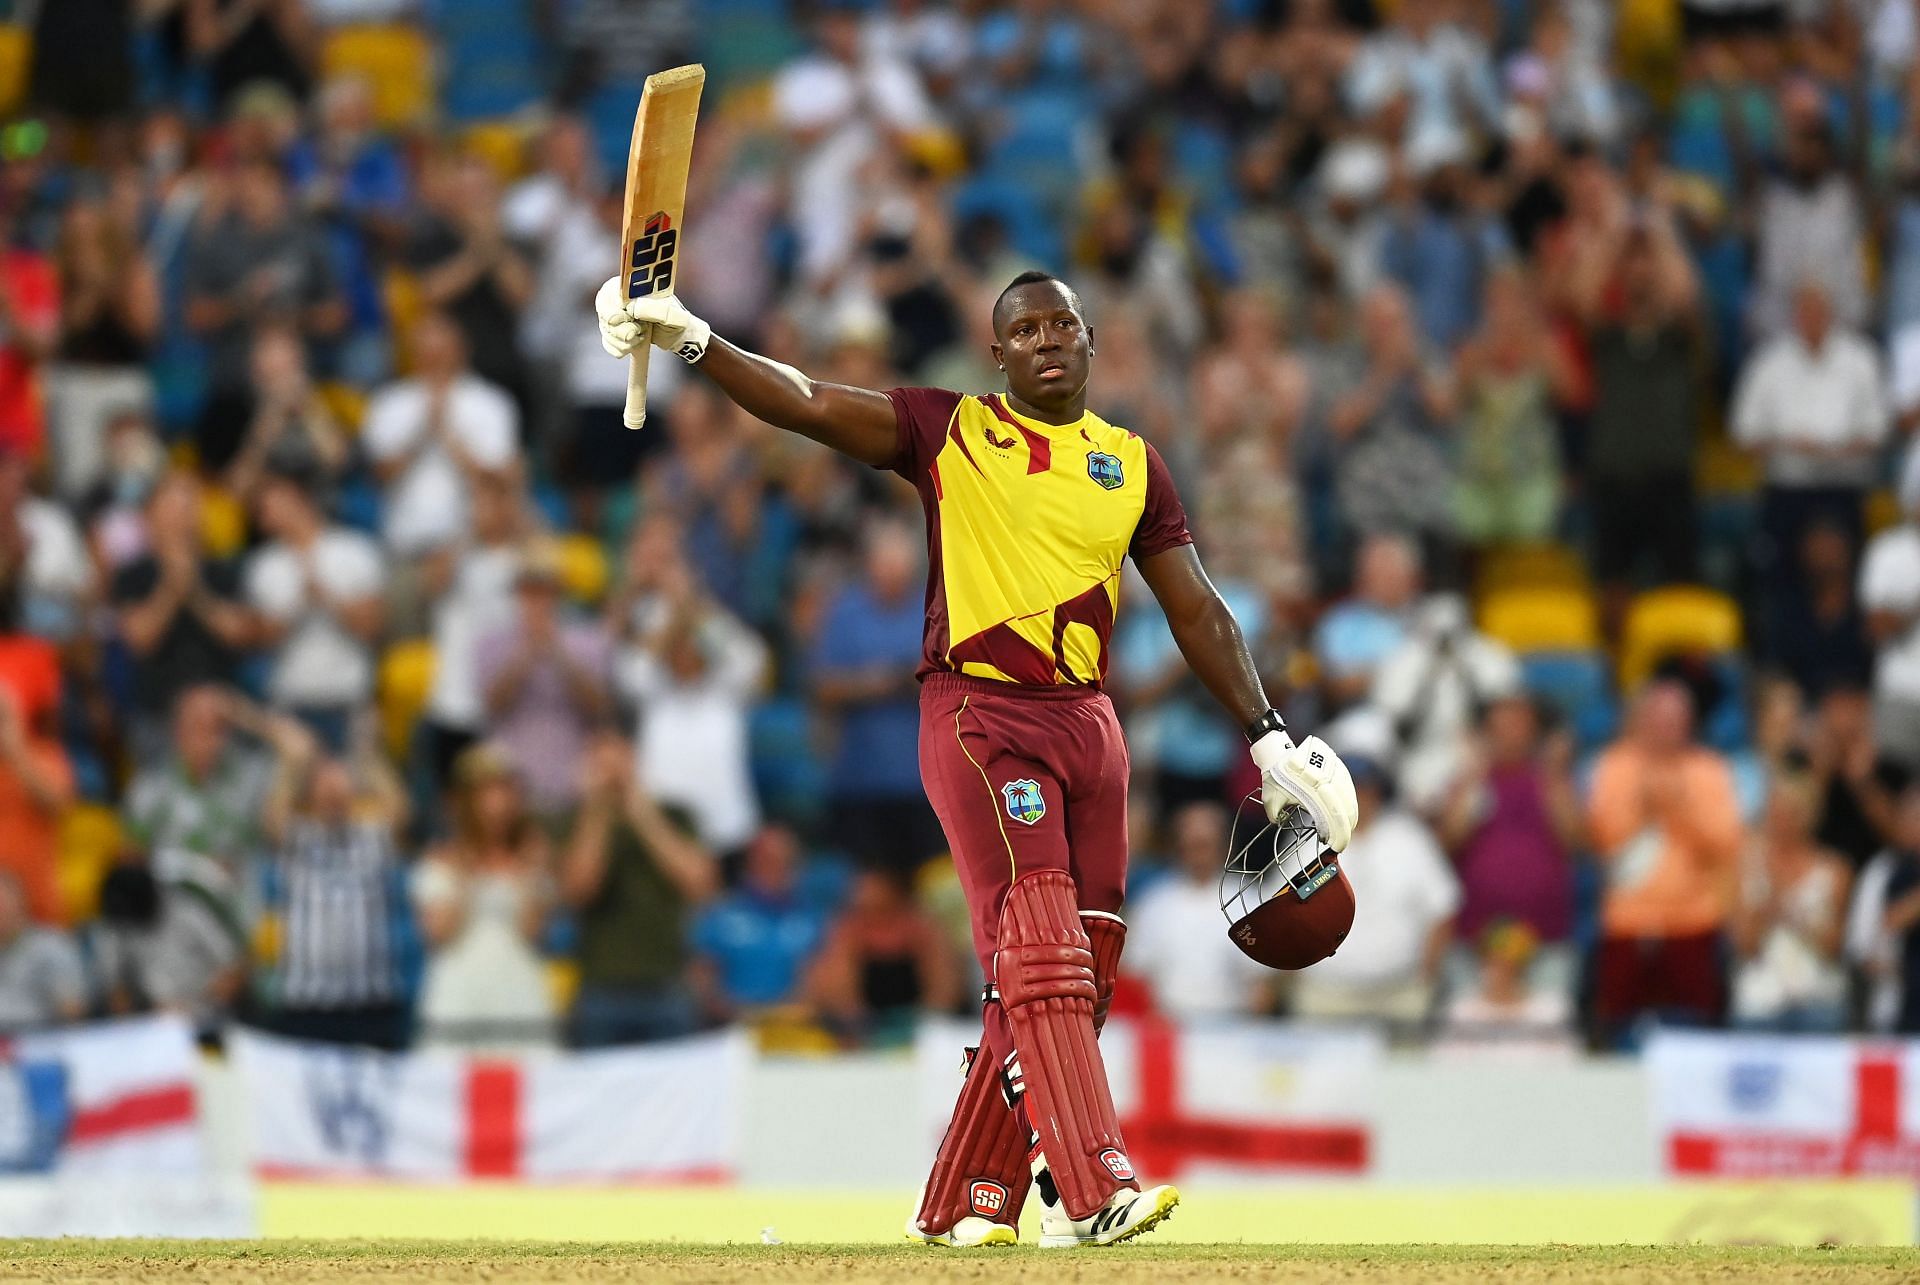 “If you have been following West Indies T20 cricket, the guys have been improving” – Rovman Powell